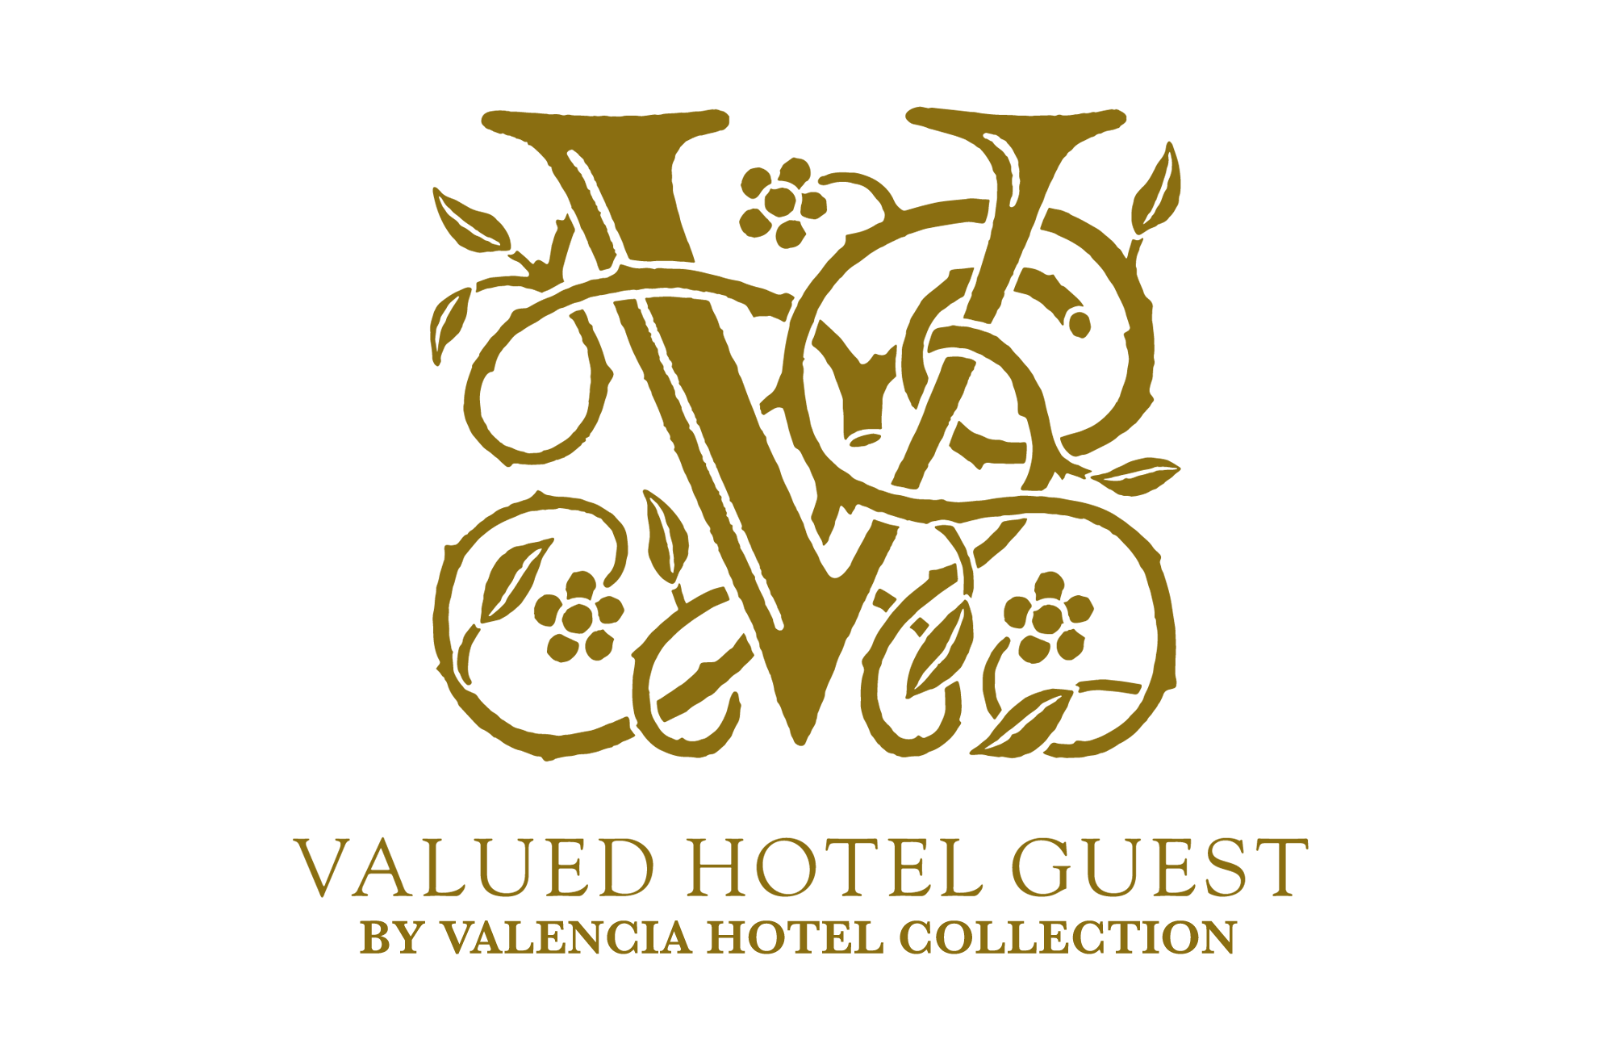 Valued Hotel Guest by Valencia Hotel Collection